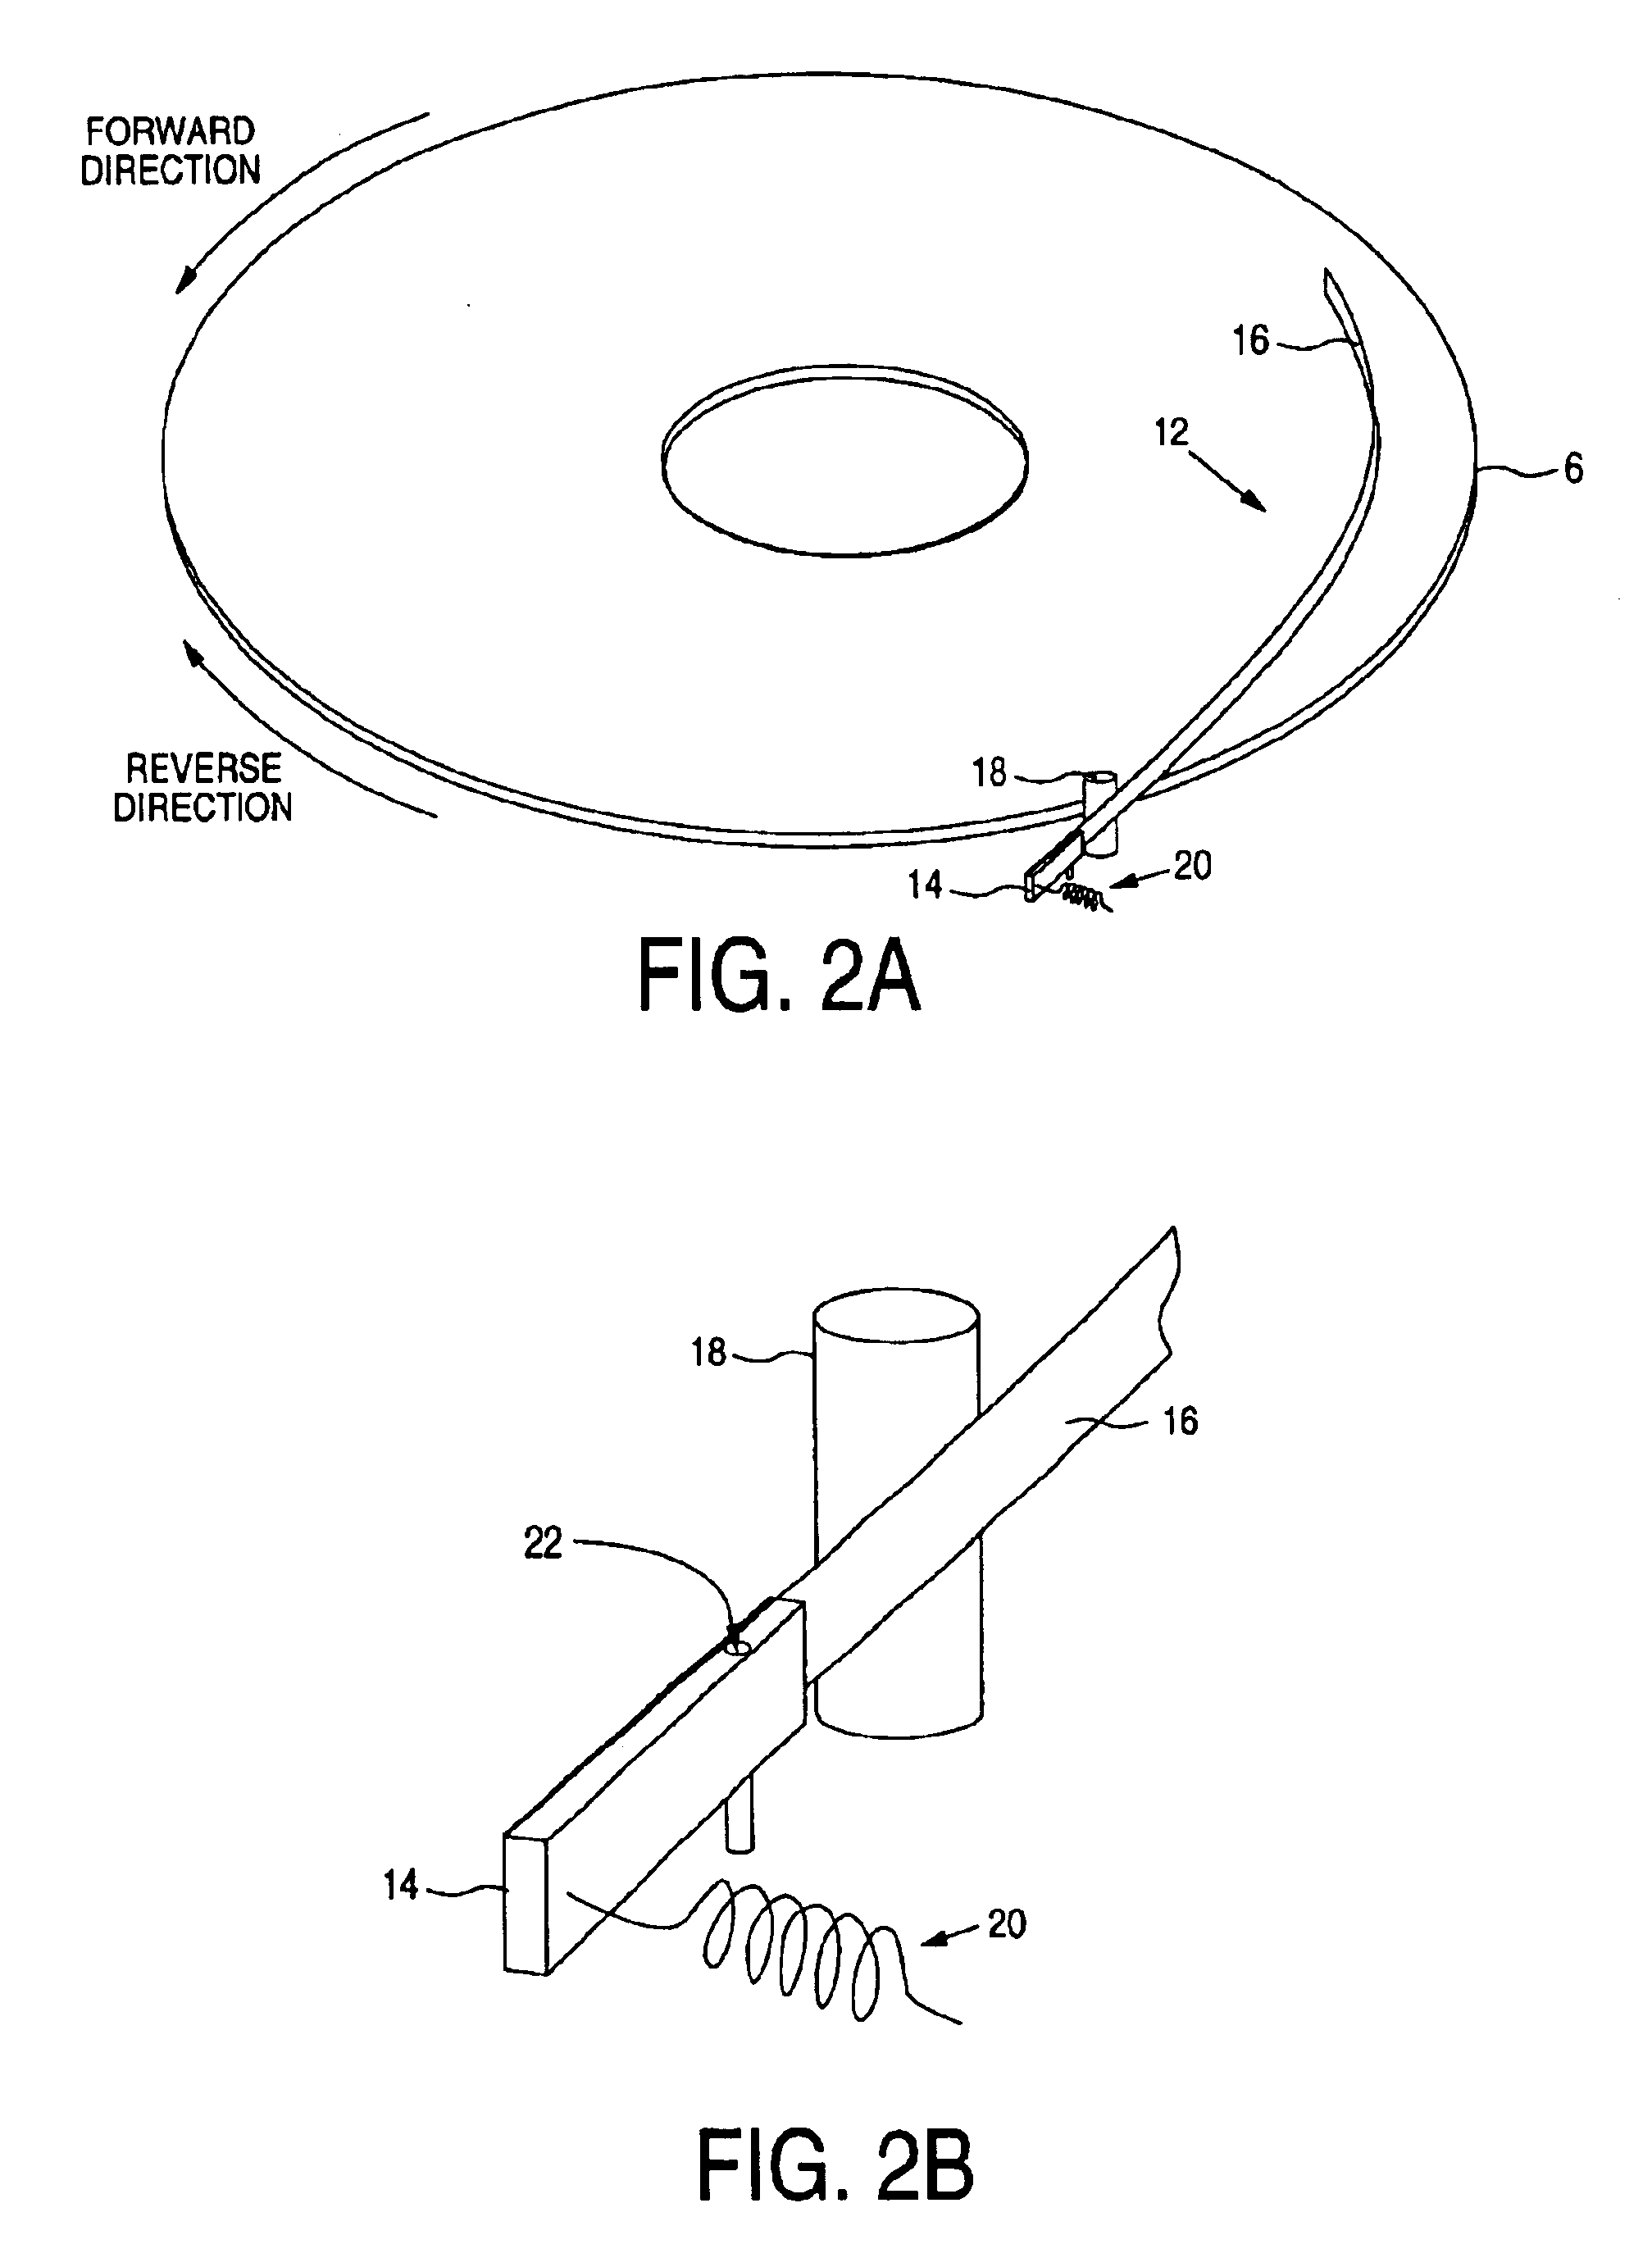 Disk drive comprising a ratchet arm applied to a disk and disengaged through windage generated by the disk rotating